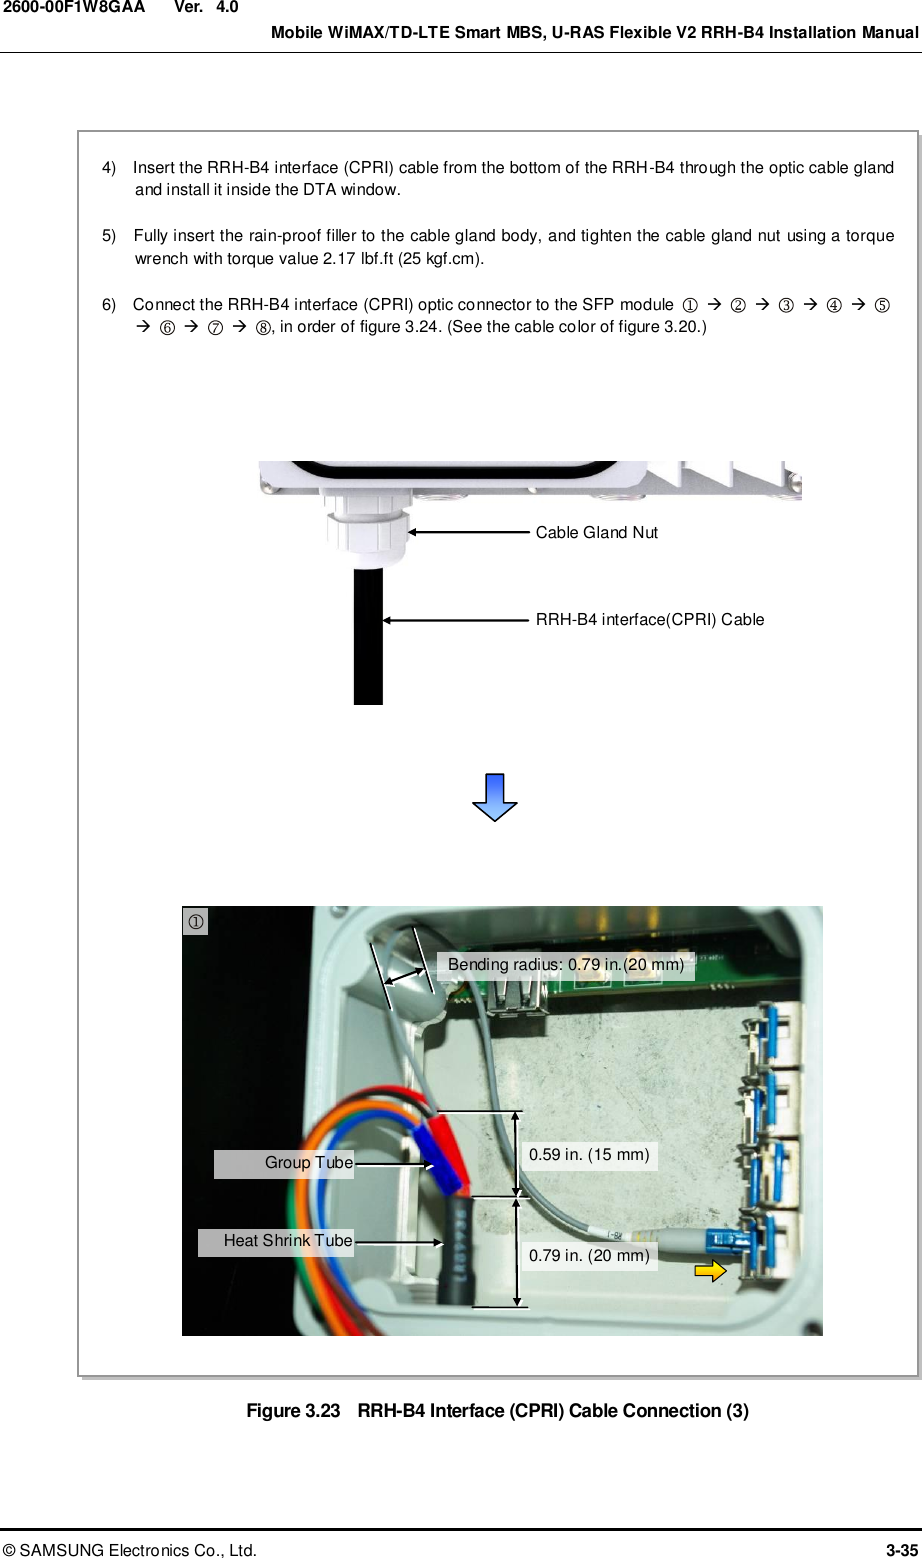  Ver.    Mobile WiMAX/TD-LTE Smart MBS, U-RAS Flexible V2 RRH-B4 Installation Manual ©  SAMSUNG Electronics Co., Ltd.  3-35 2600-00F1W8GAA 4.0  Figure 3.23   RRH-B4 Interface (CPRI) Cable Connection (3)  4)    Insert the RRH-B4 interface (CPRI) cable from the bottom of the RRH-B4 through the optic cable gland and install it inside the DTA window.  5)    Fully insert the rain-proof filler to the cable gland body, and tighten the cable gland nut using a torque wrench with torque value 2.17 lbf.ft (25 kgf.cm).  6)    Connect the RRH-B4 interface (CPRI) optic connector to the SFP module                             , in order of figure 3.24. (See the cable color of figure 3.20.)  Cable Gland Nut RRH-B4 interface(CPRI) Cable  Heat Shrink Tube  Group Tube  Bending radius: 0.79 in.(20 mm)  0.59 in. (15 mm)  0.79 in. (20 mm)  